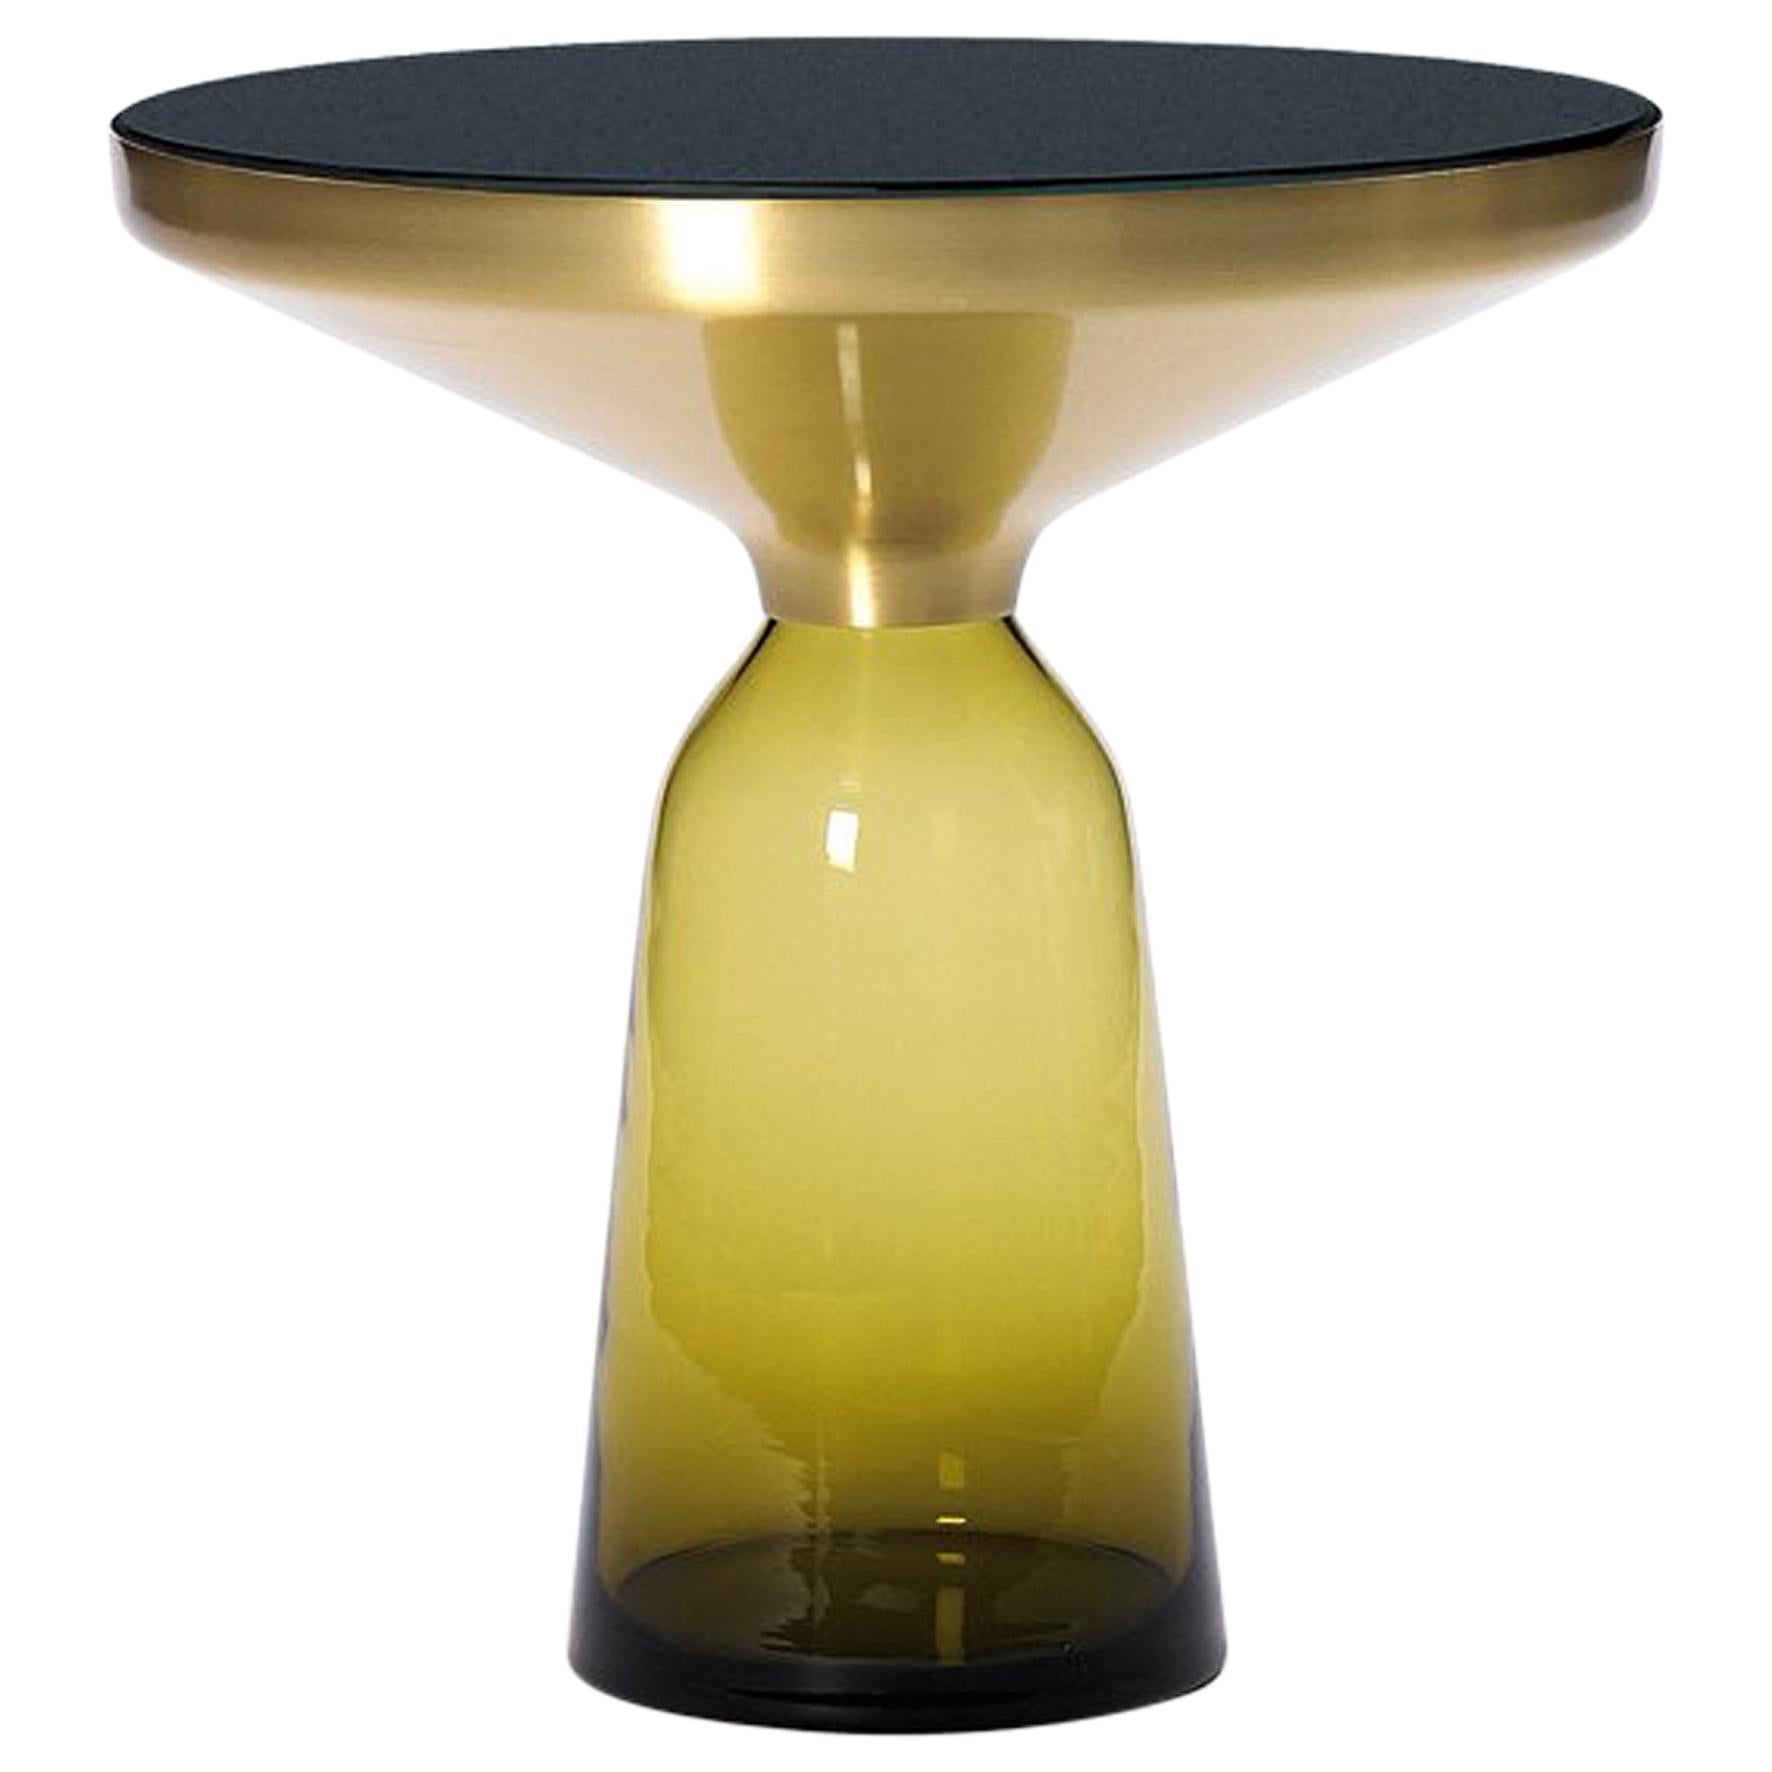 ClassiCon Bell Table with Nero Marquina Marble Top by Sebastian Herkner STOCK